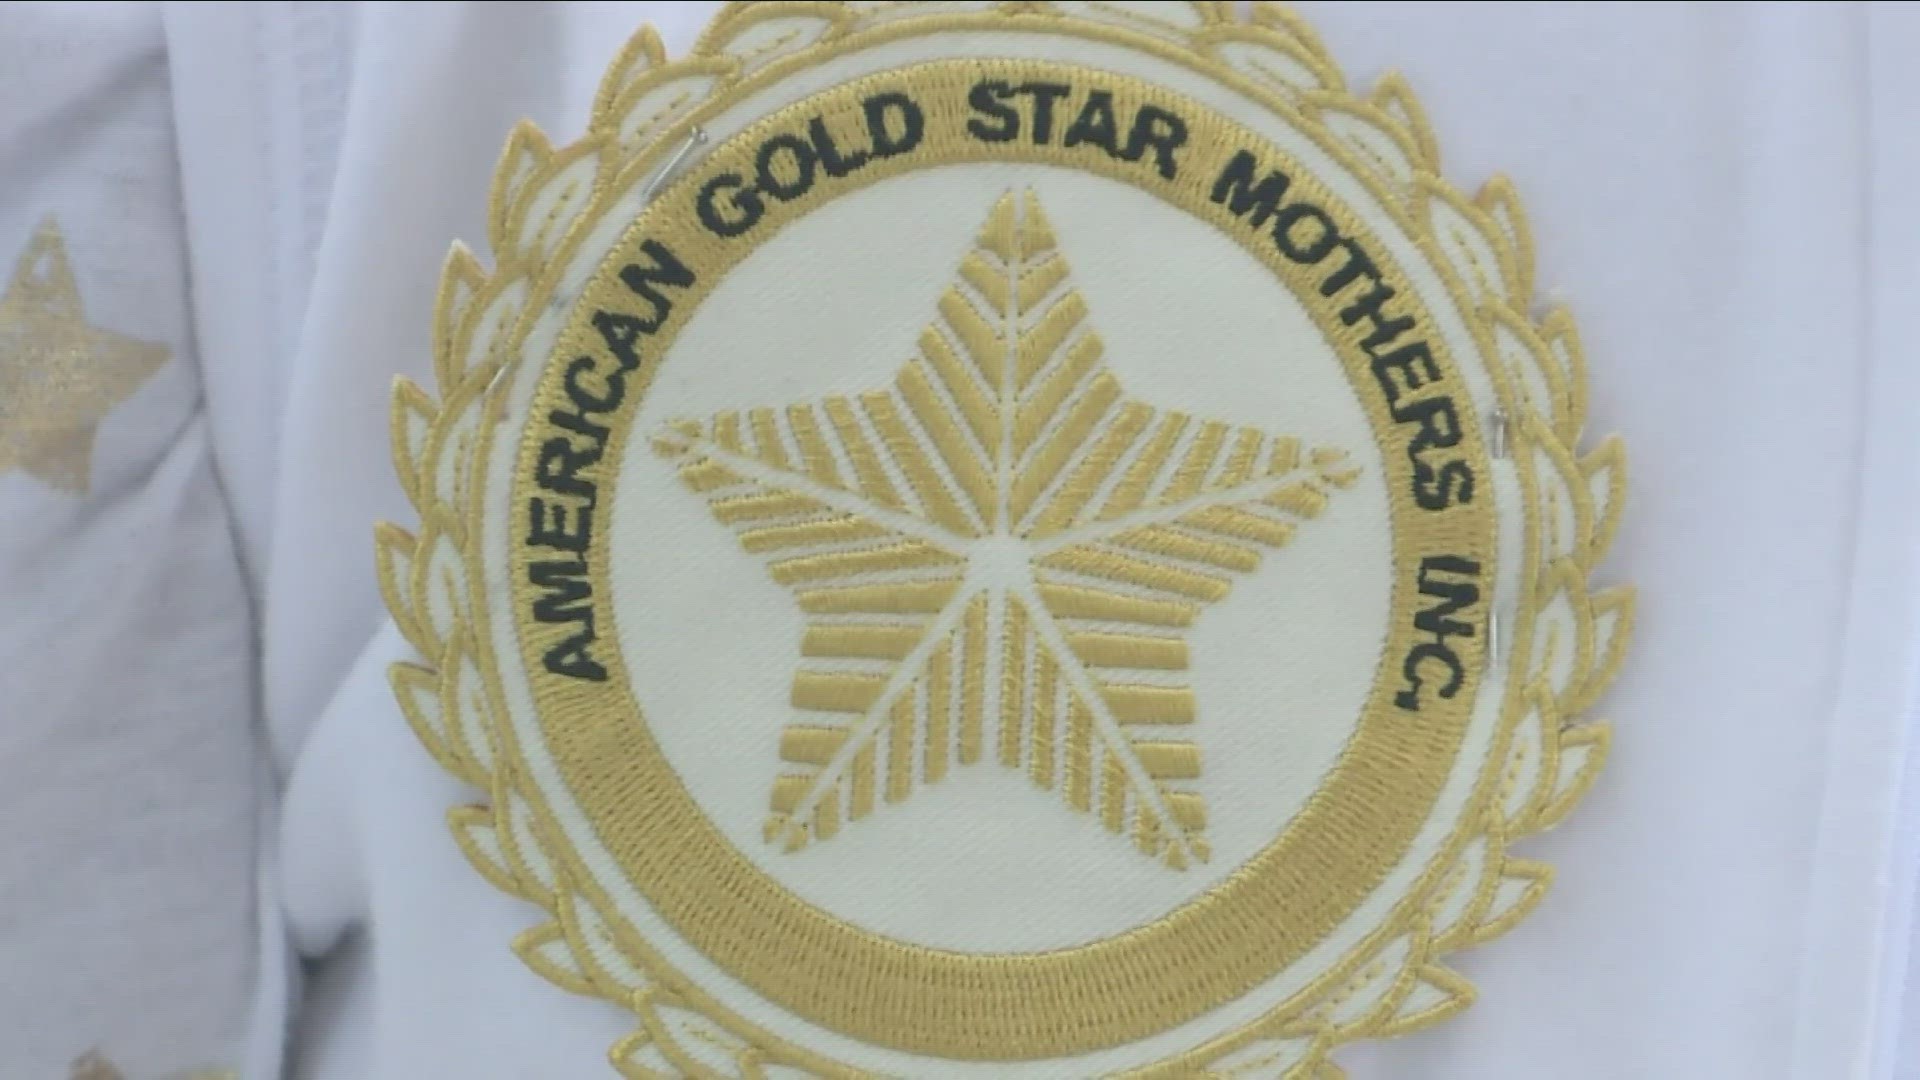 Gold Star Mothers and the club no one want to join